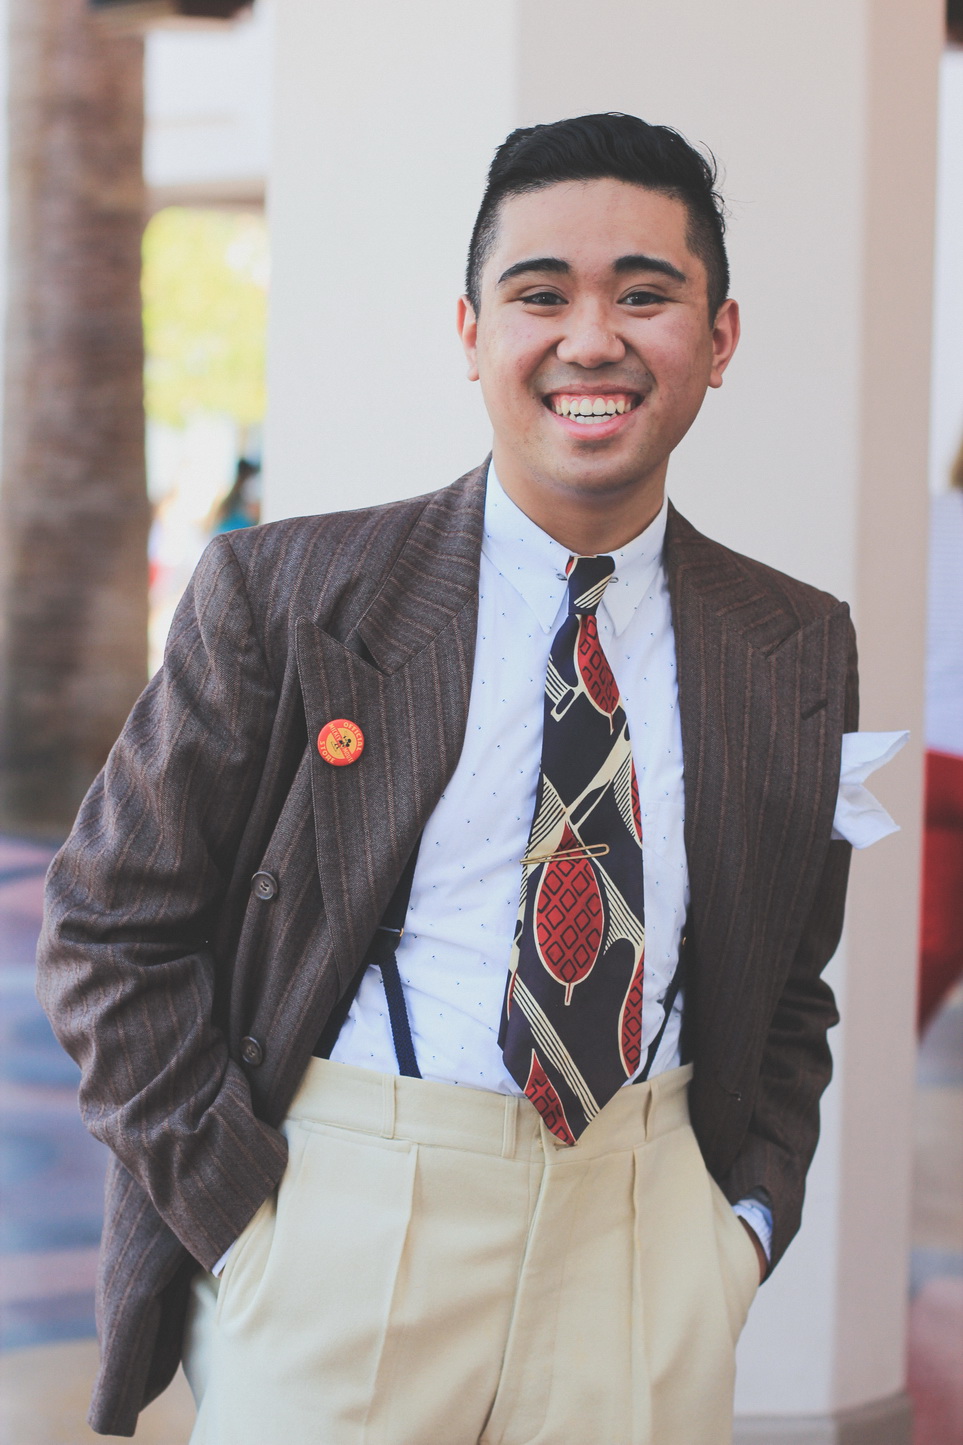 Short Tie 1930s style by Ethan Wong